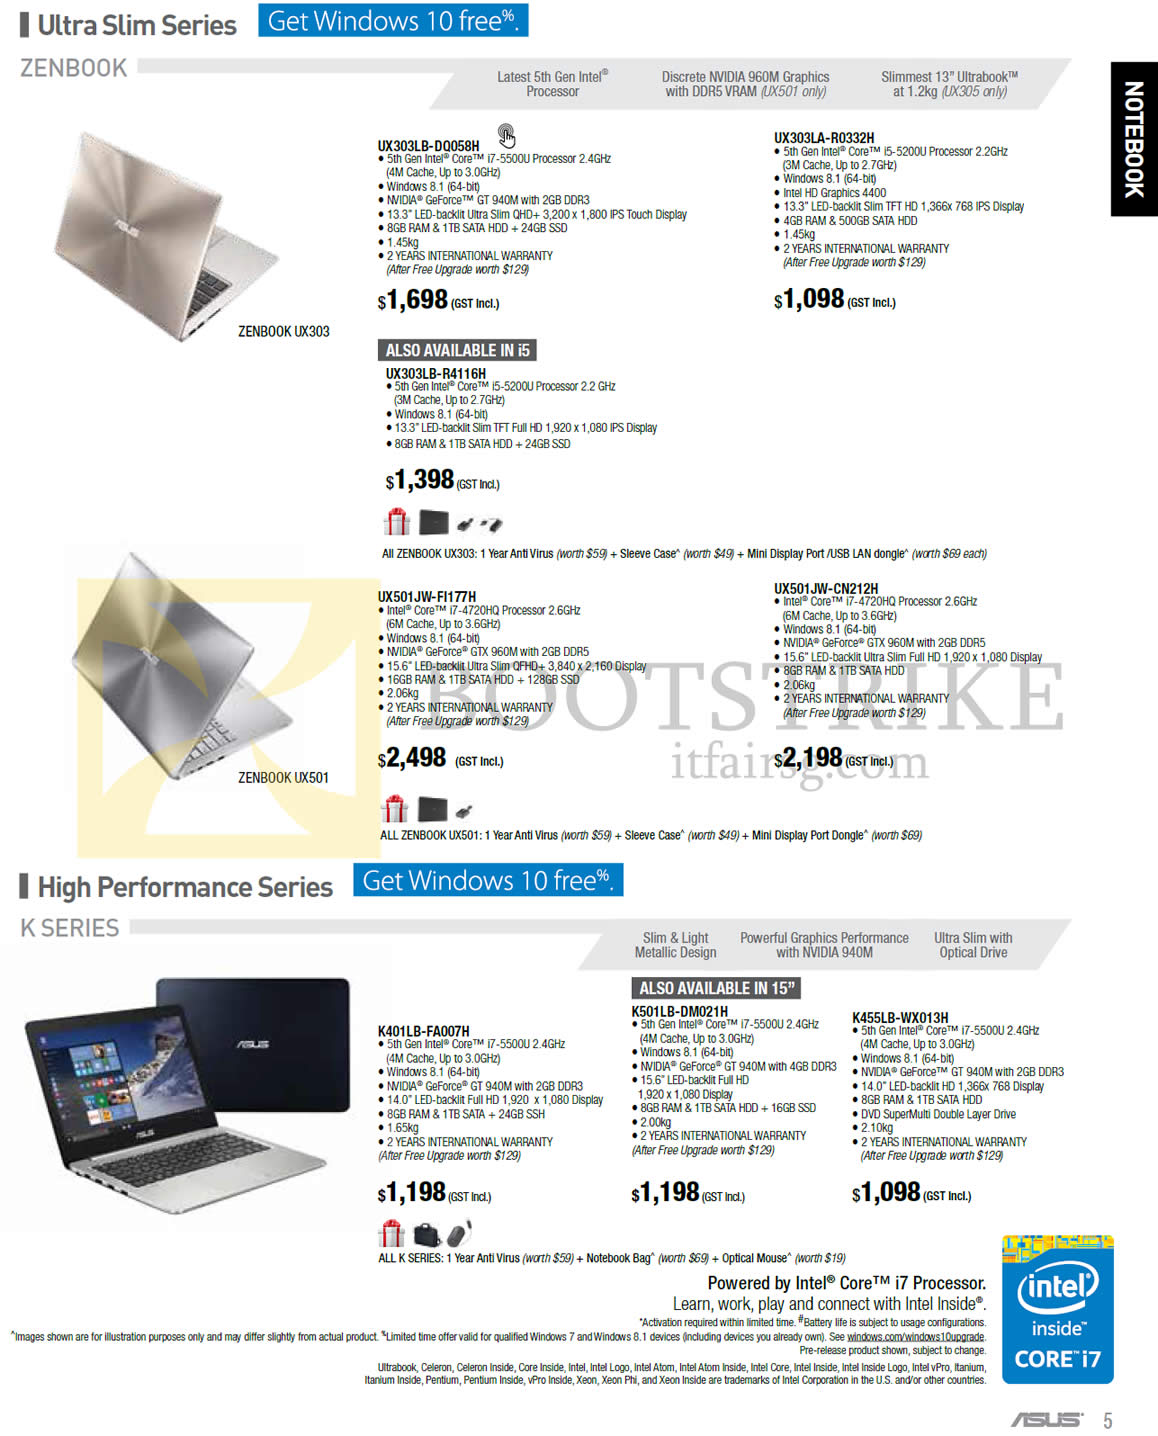 COMEX 2015 price list image brochure of ASUS Notebooks, Zenbook, K Series, UX303LB-DQ058H, UX303LA-R0332H, UX303LB-R4116H, UX501JW-FI177H, UX501JW-CN212H, K401LB-FA007H, K501LB-DM021H, K455LB-WX013H